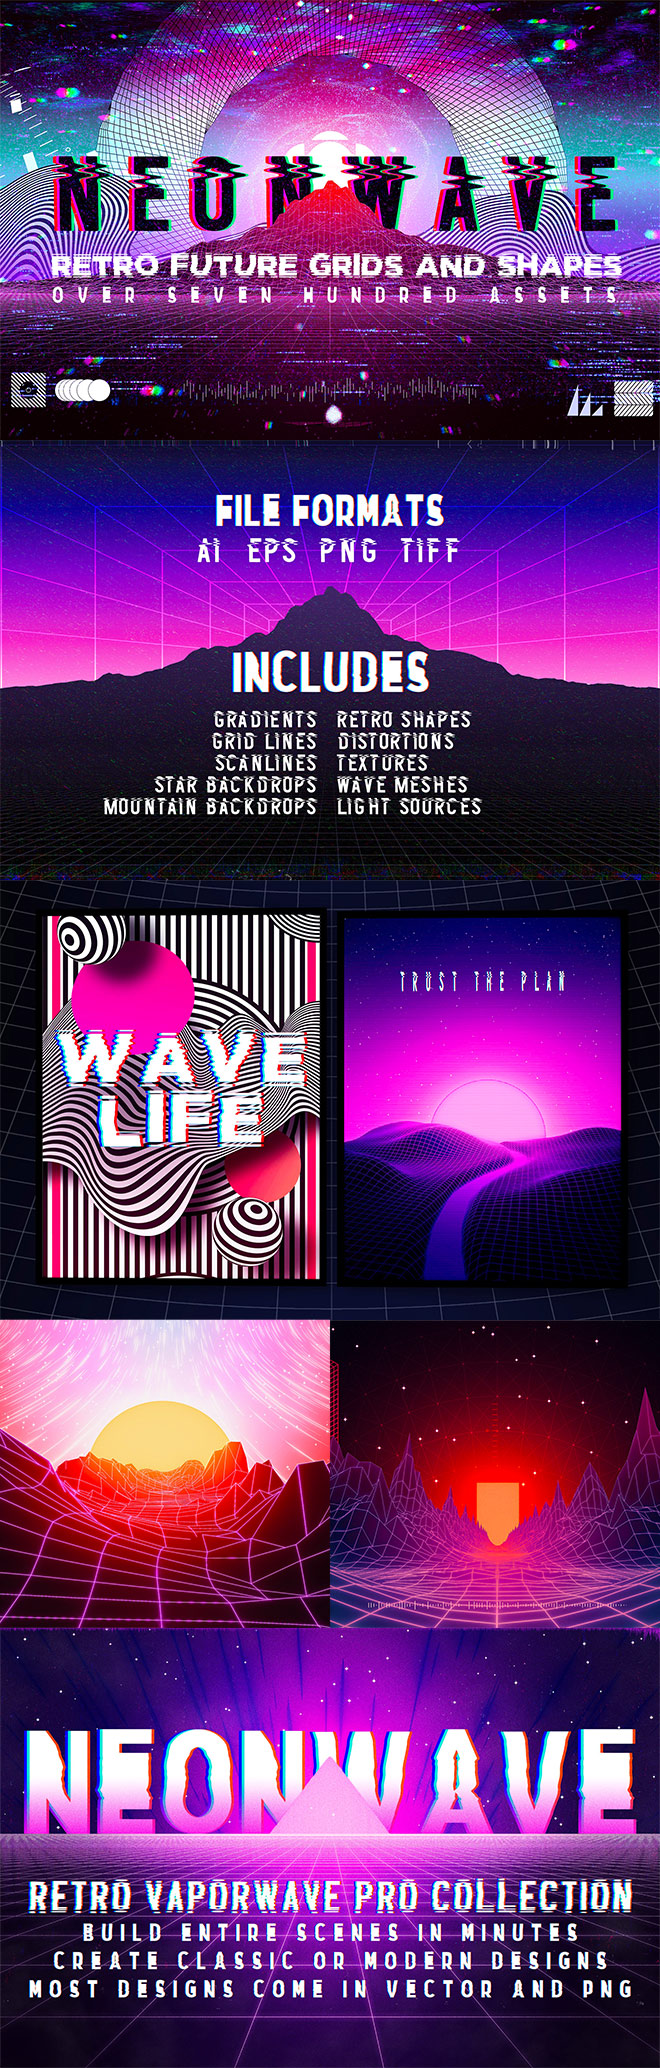 NeonWave Retro Future Grids and Shapes